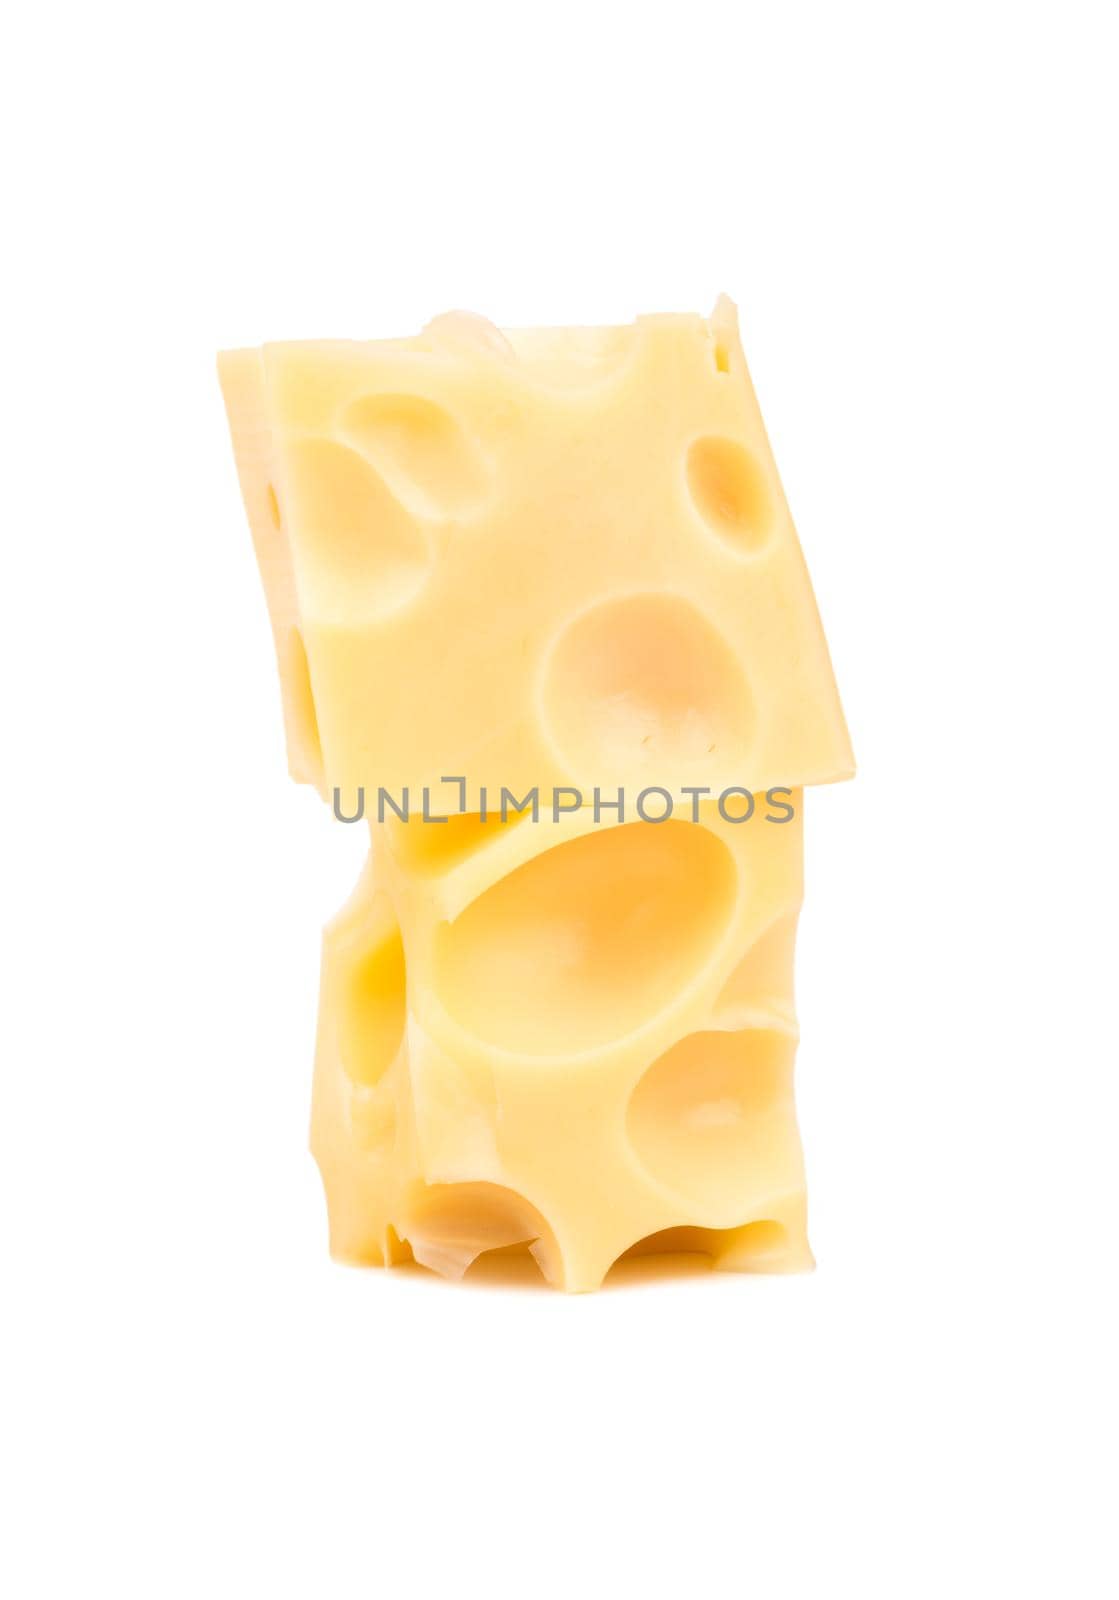 Two cubes of cheese with holes on a white background